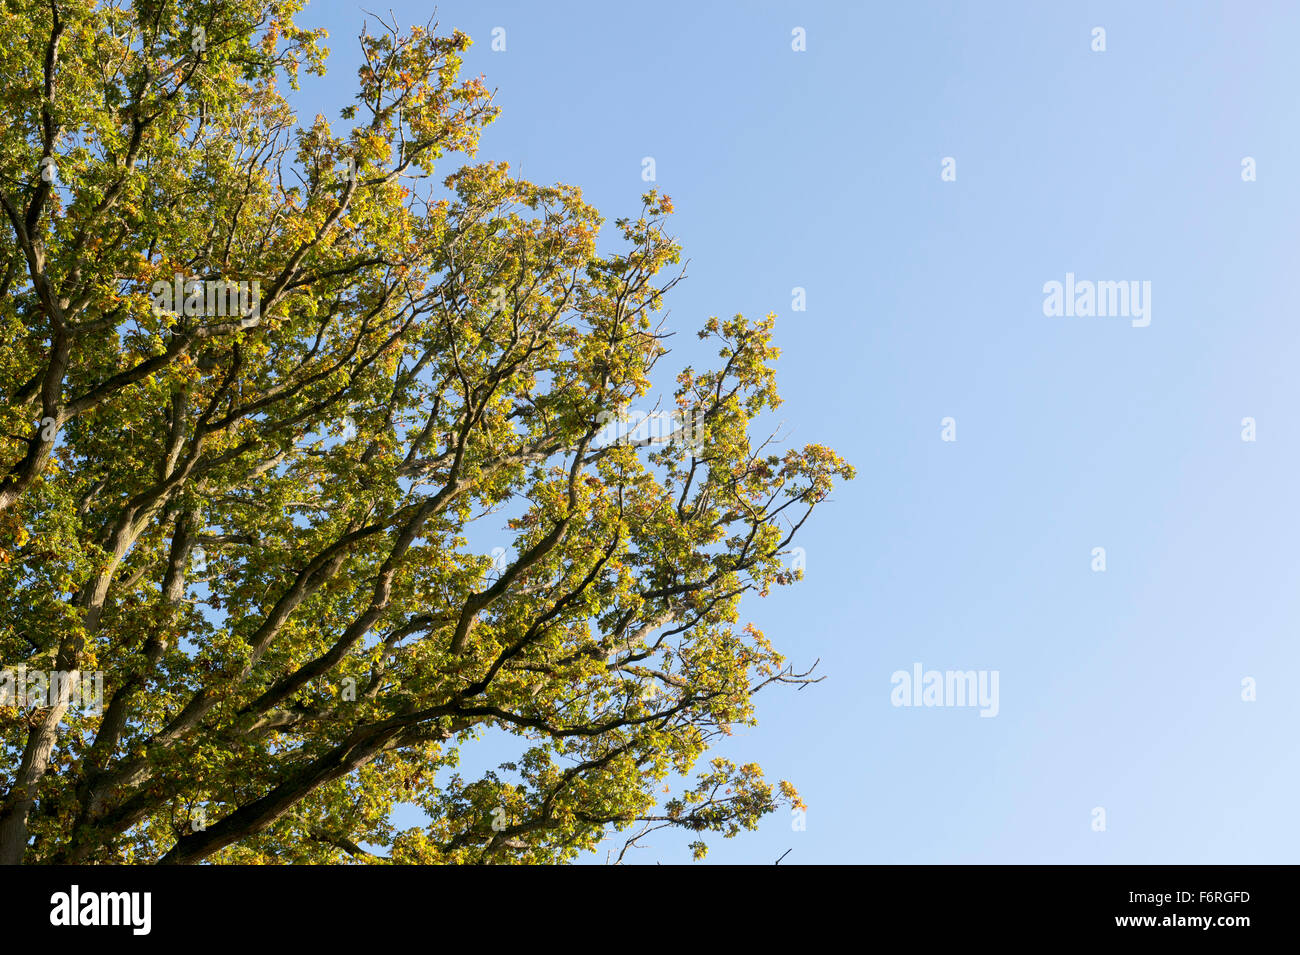 Quercus robur. Oak tree leaf canopy in autumn changing colour. UK Stock Photo